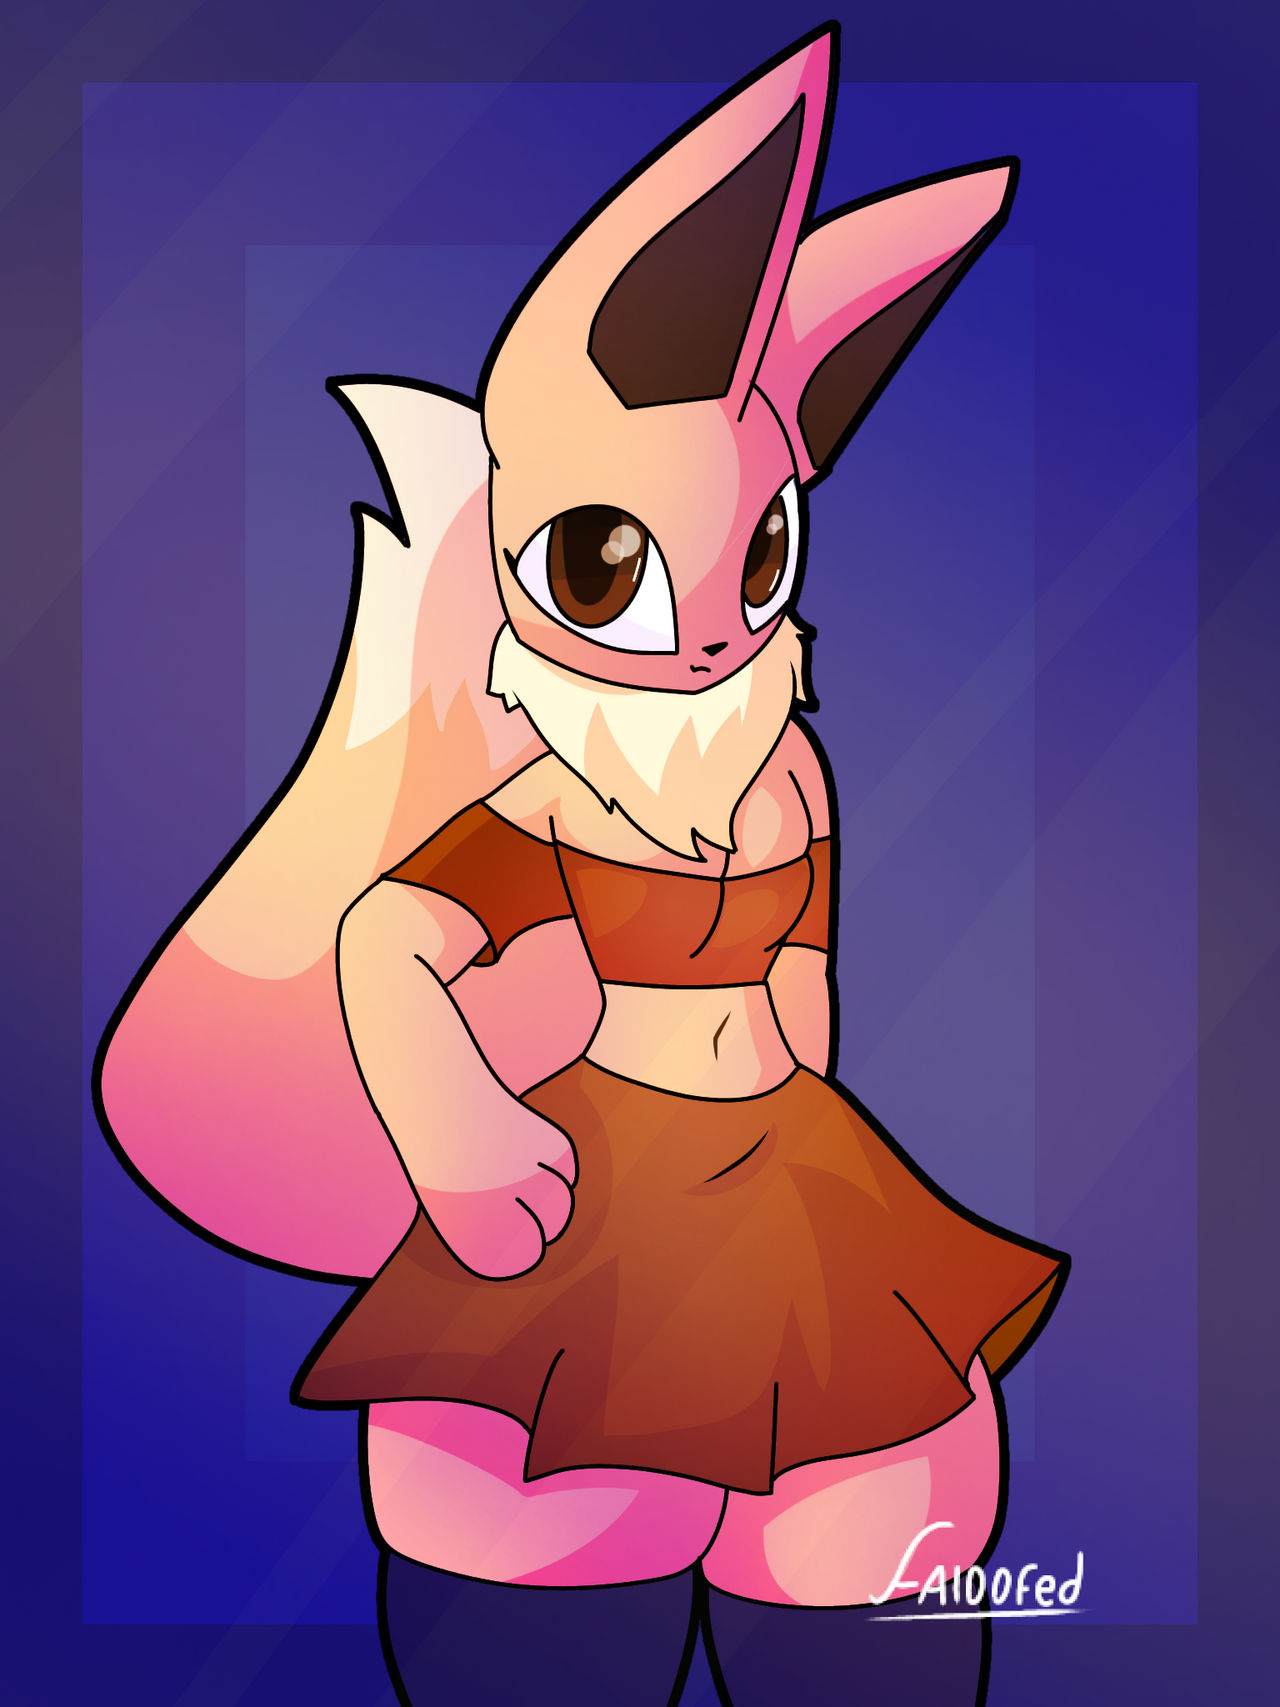 Cooler eevee (posted out of spite) by MiraculousLazuli on DeviantArt